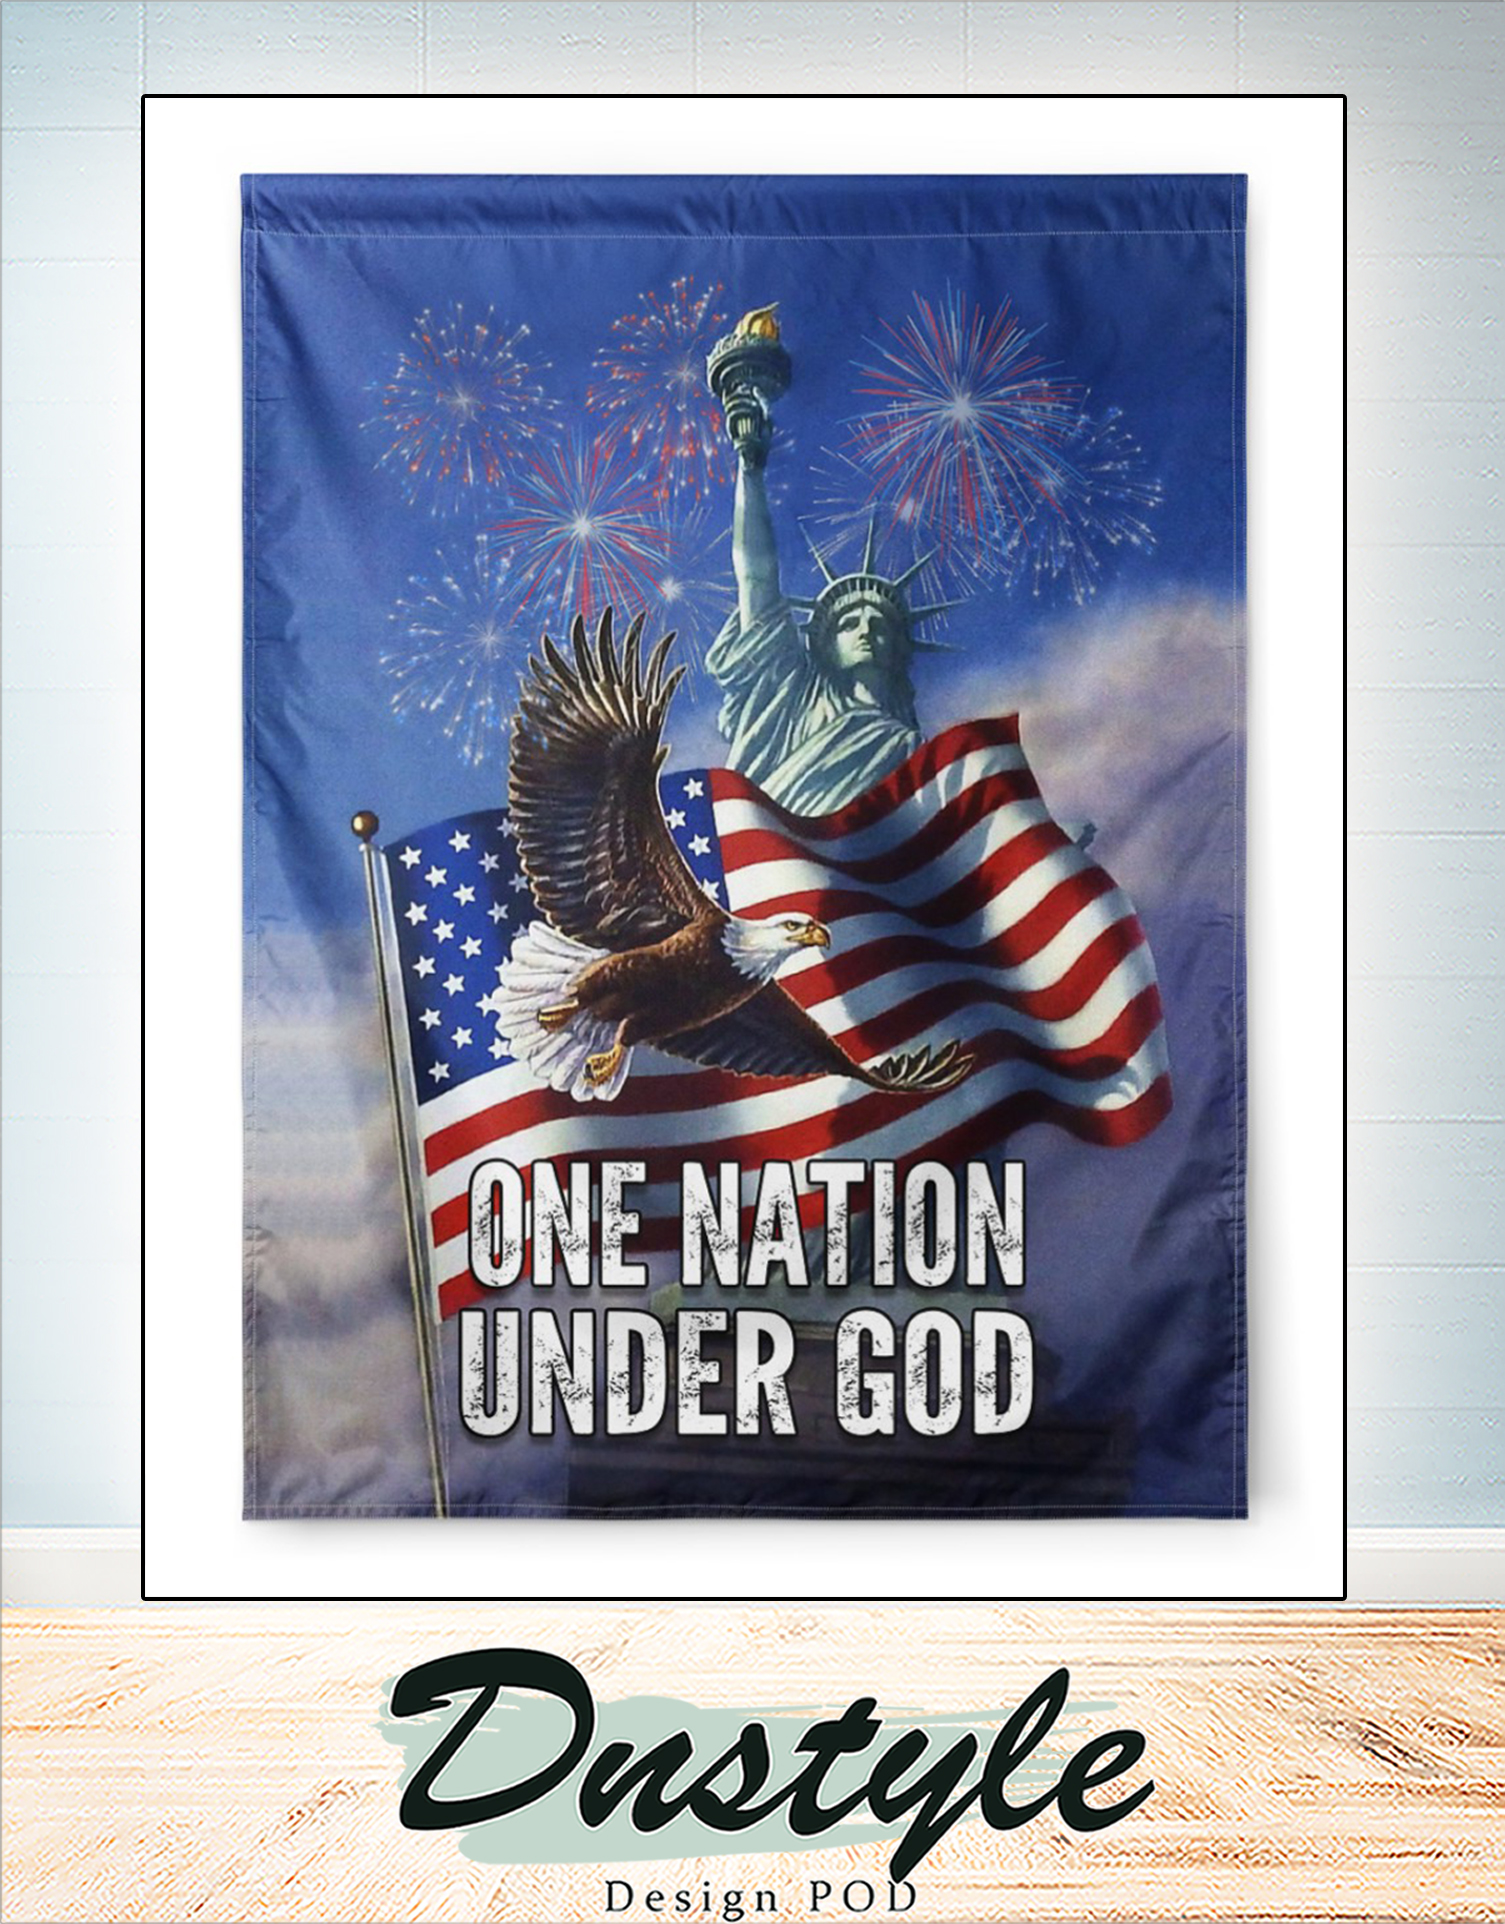 Statue of liberty one nation under god flag